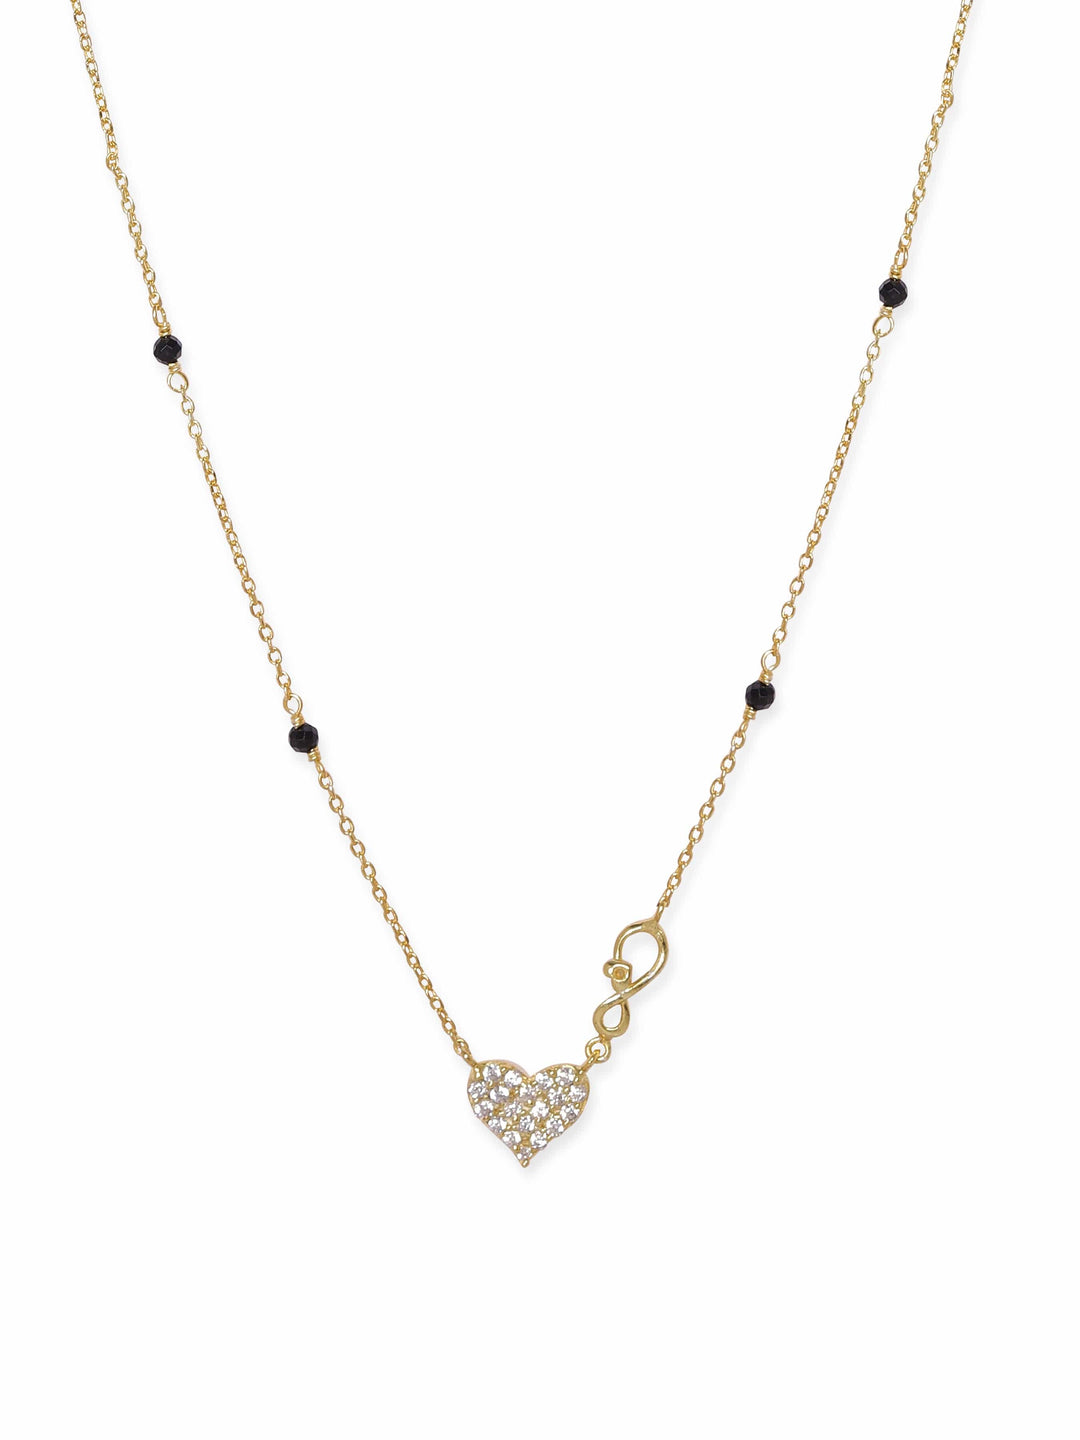 Rubans Silver 22K Gold plated 925 Sterling Silver Zirconia heart pendant mangalsutra necklace Necklace